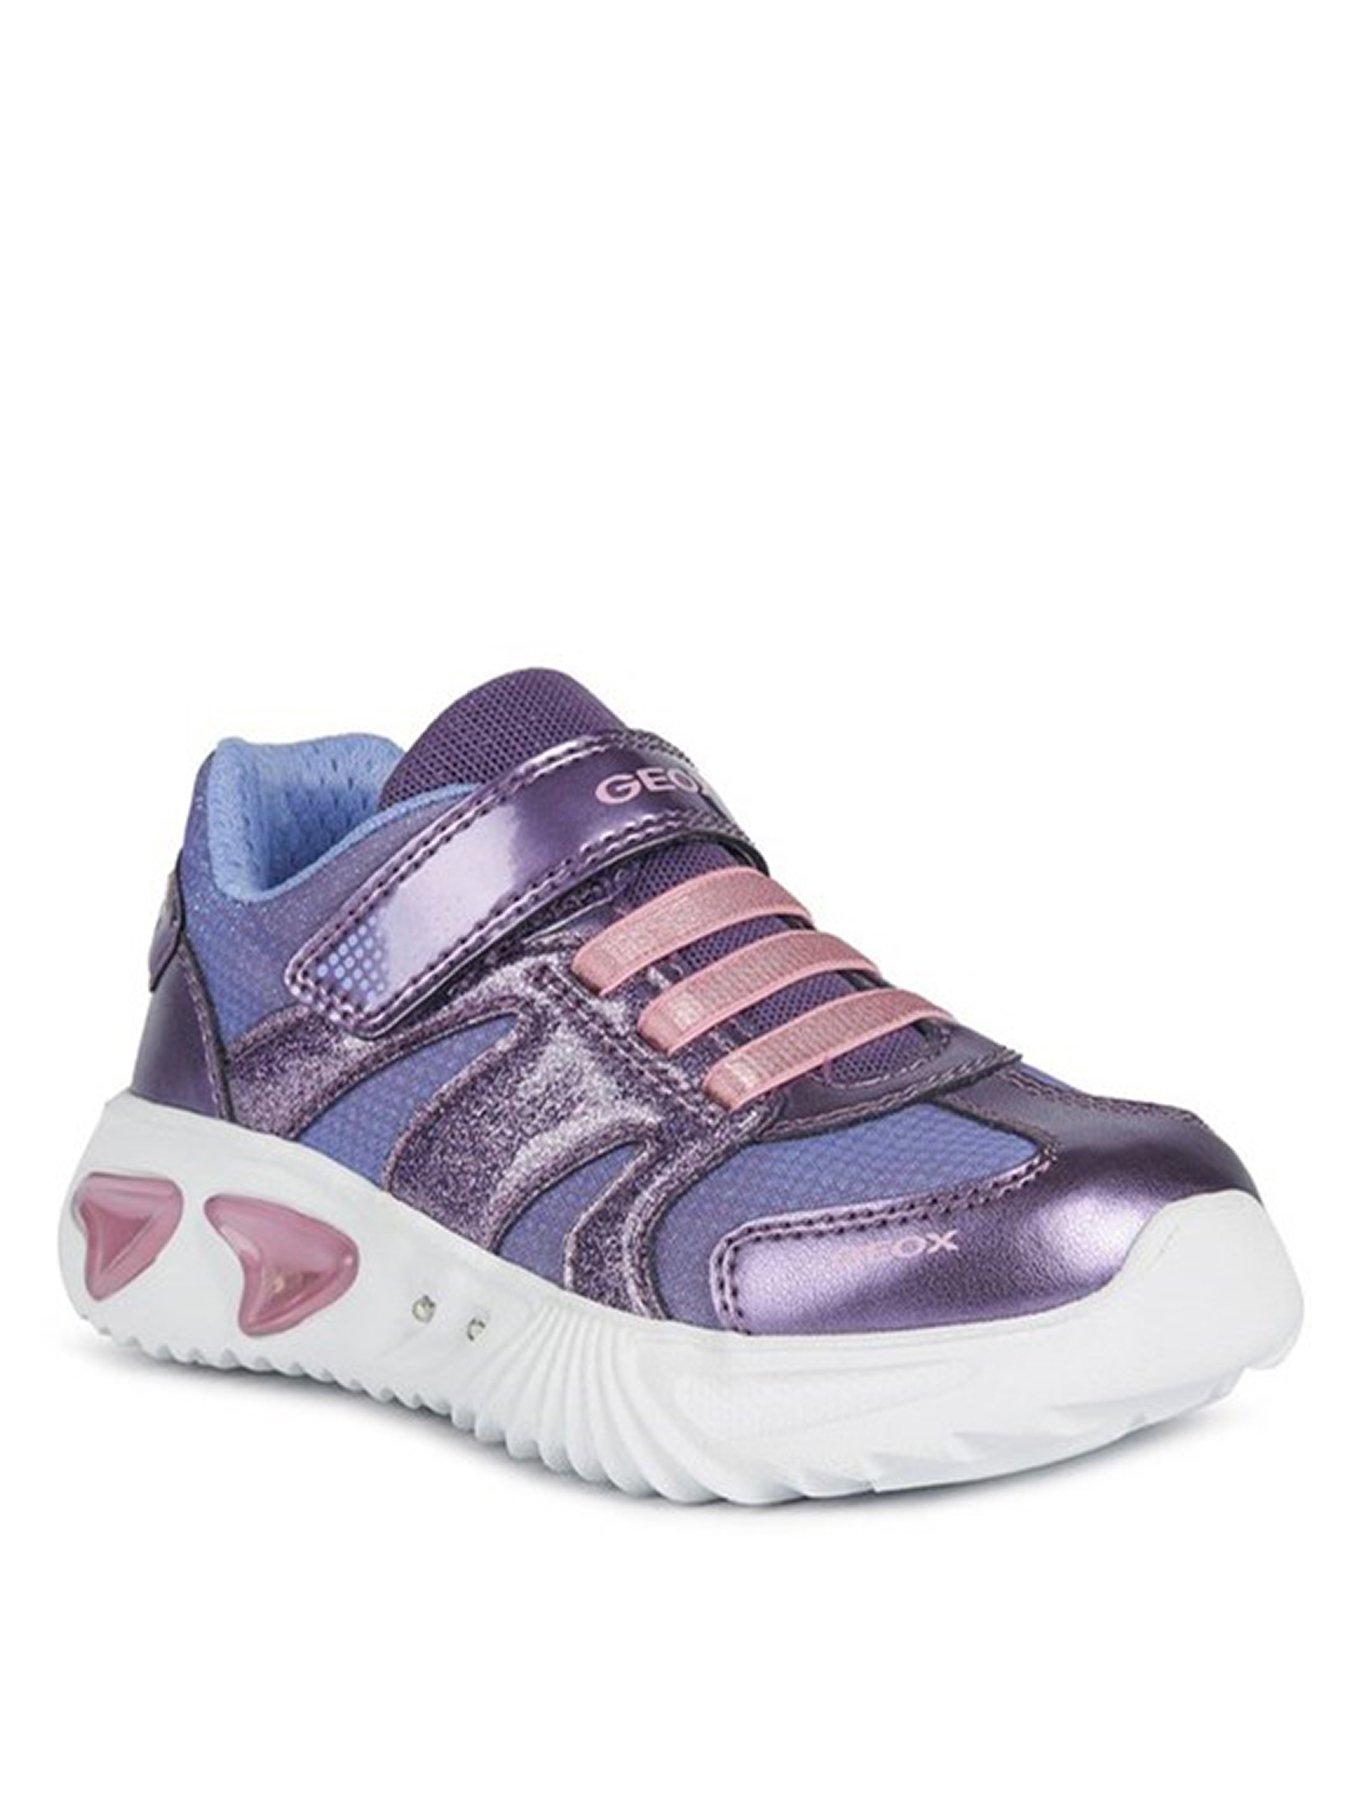  Girls Assister Strap Trainer - Purple/Pink